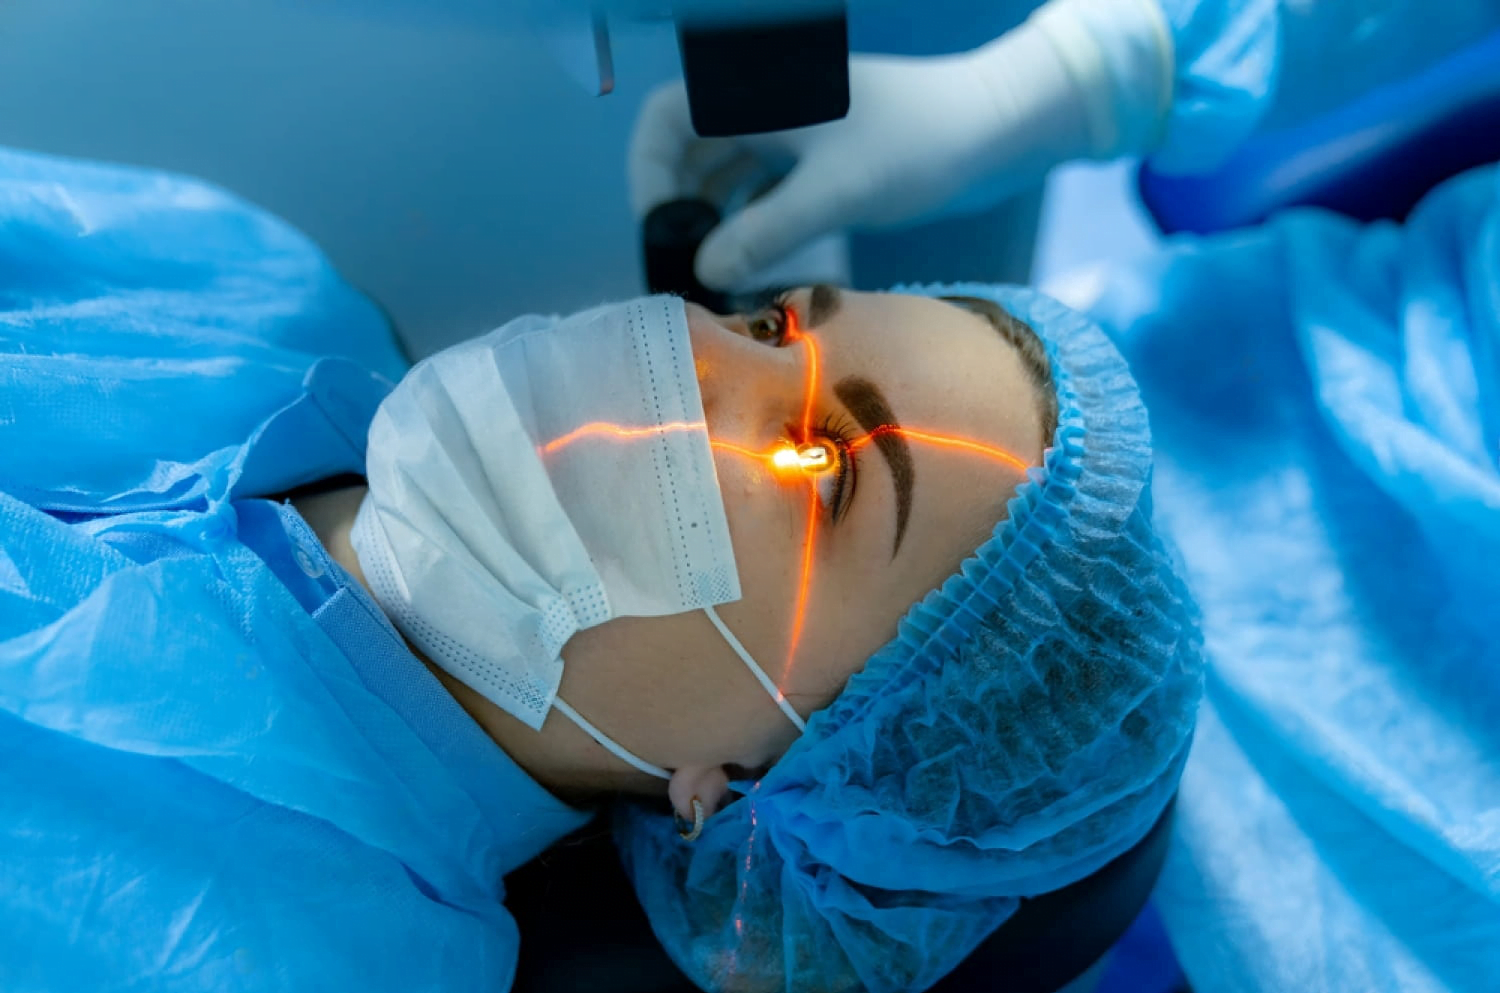 Chirurgie réfractive Annecy Laser Vision